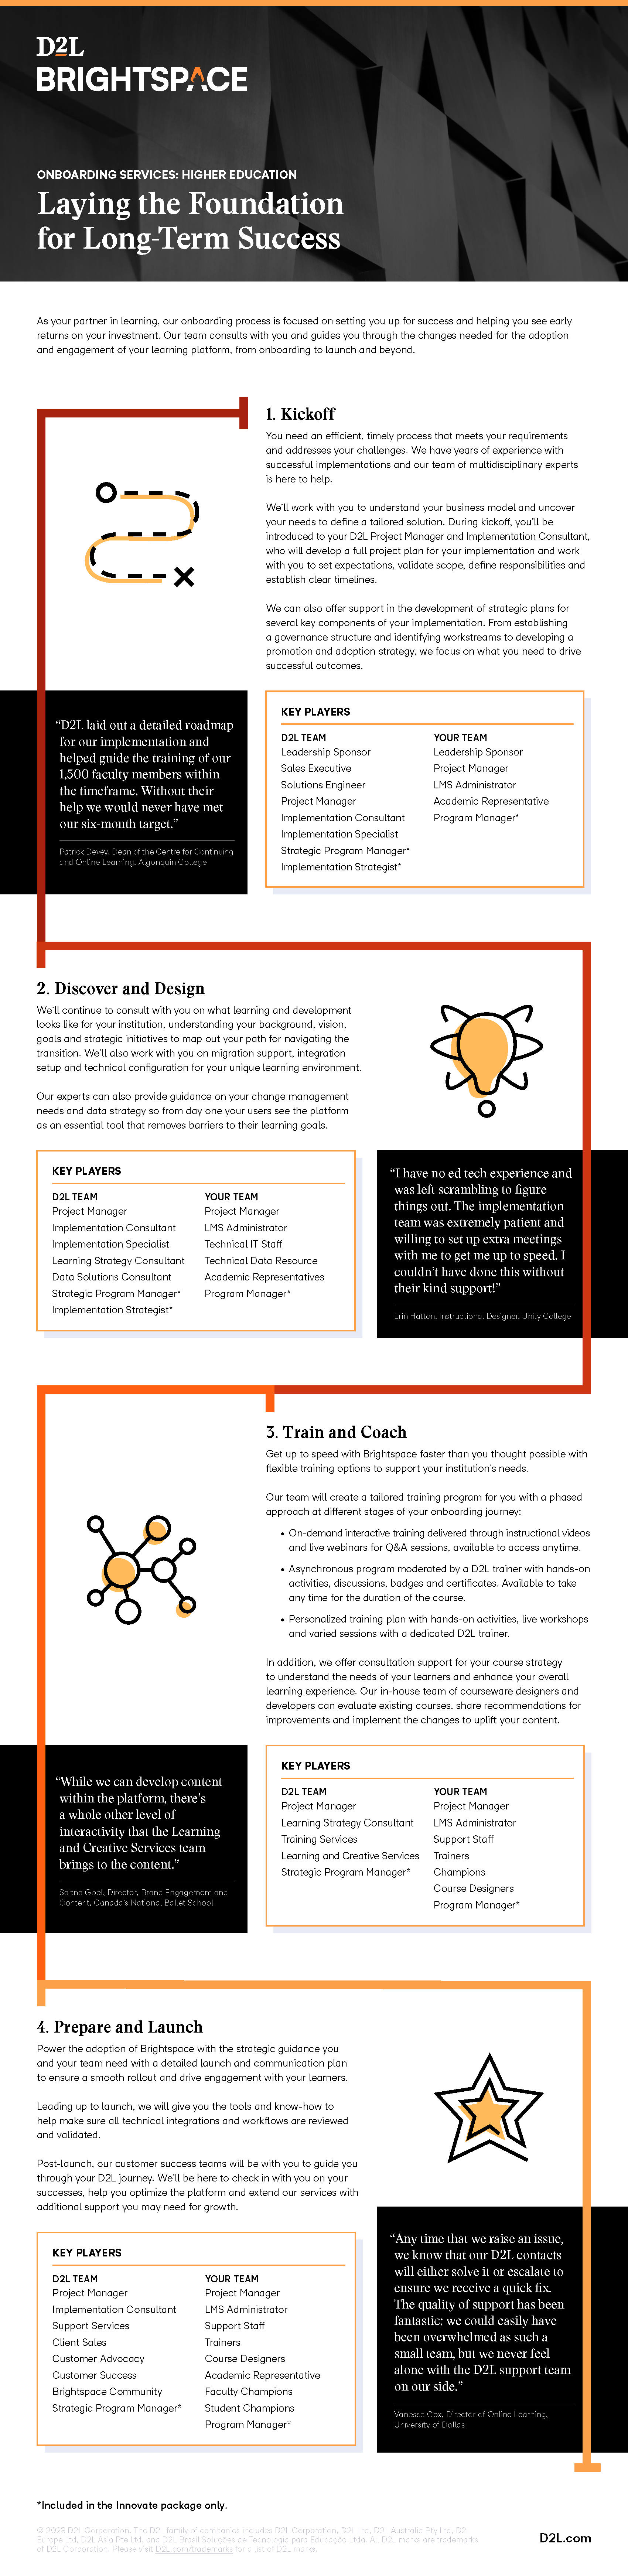 An infographic detailing D2L onboarding services for higher ed.